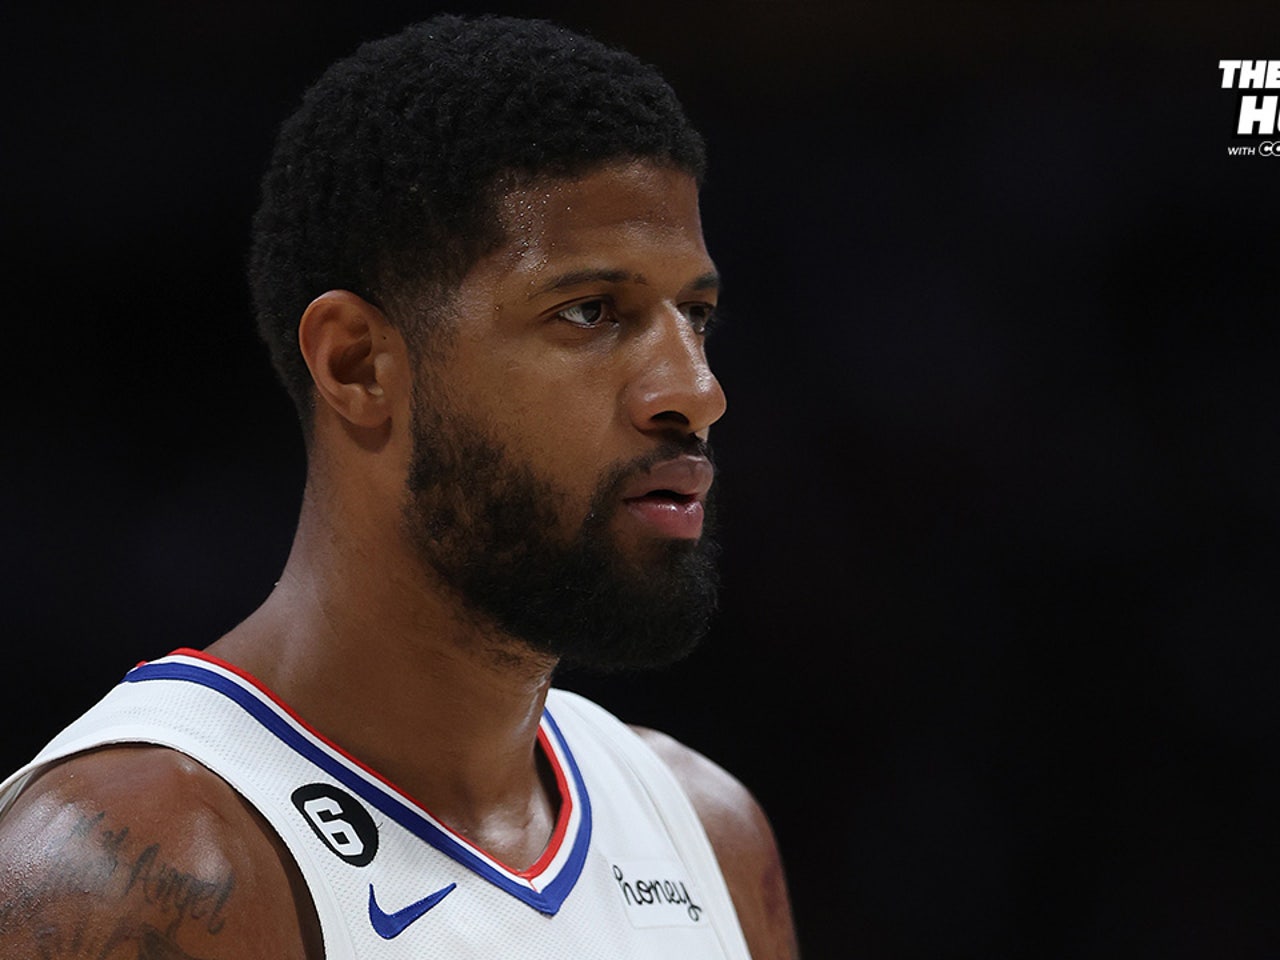 NBA Rumors: Knicks Talked Trade For Clippers' Paul George